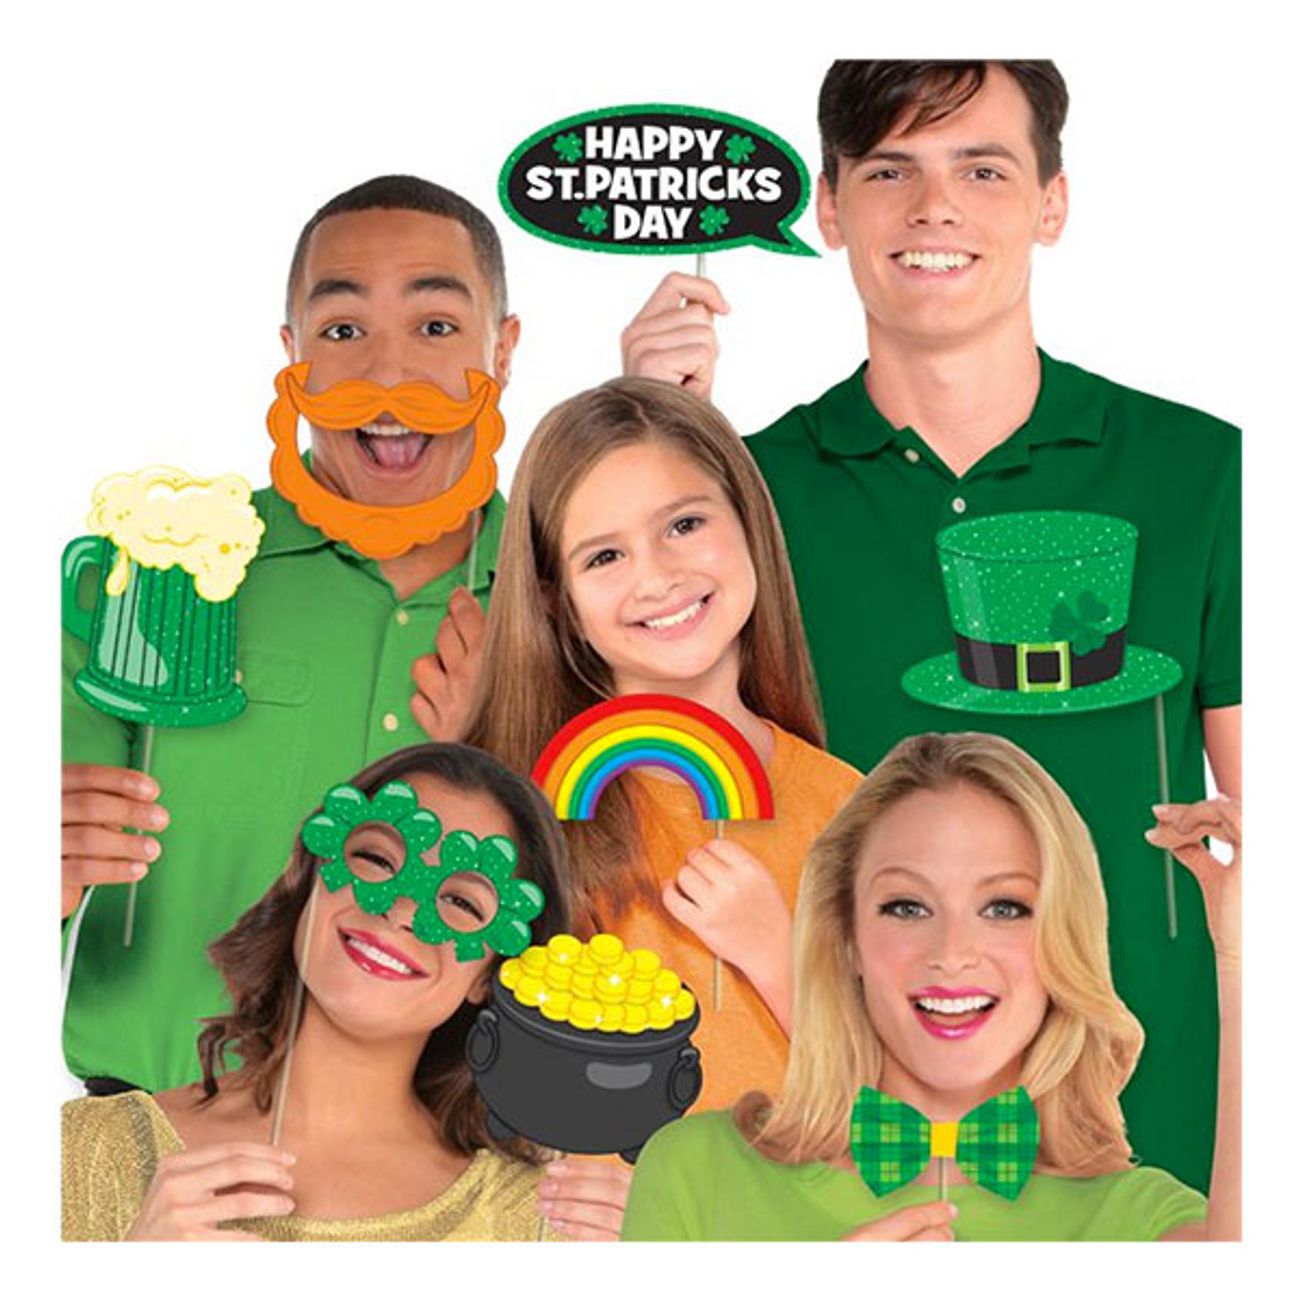 st-patricks-day-photo-booth-1